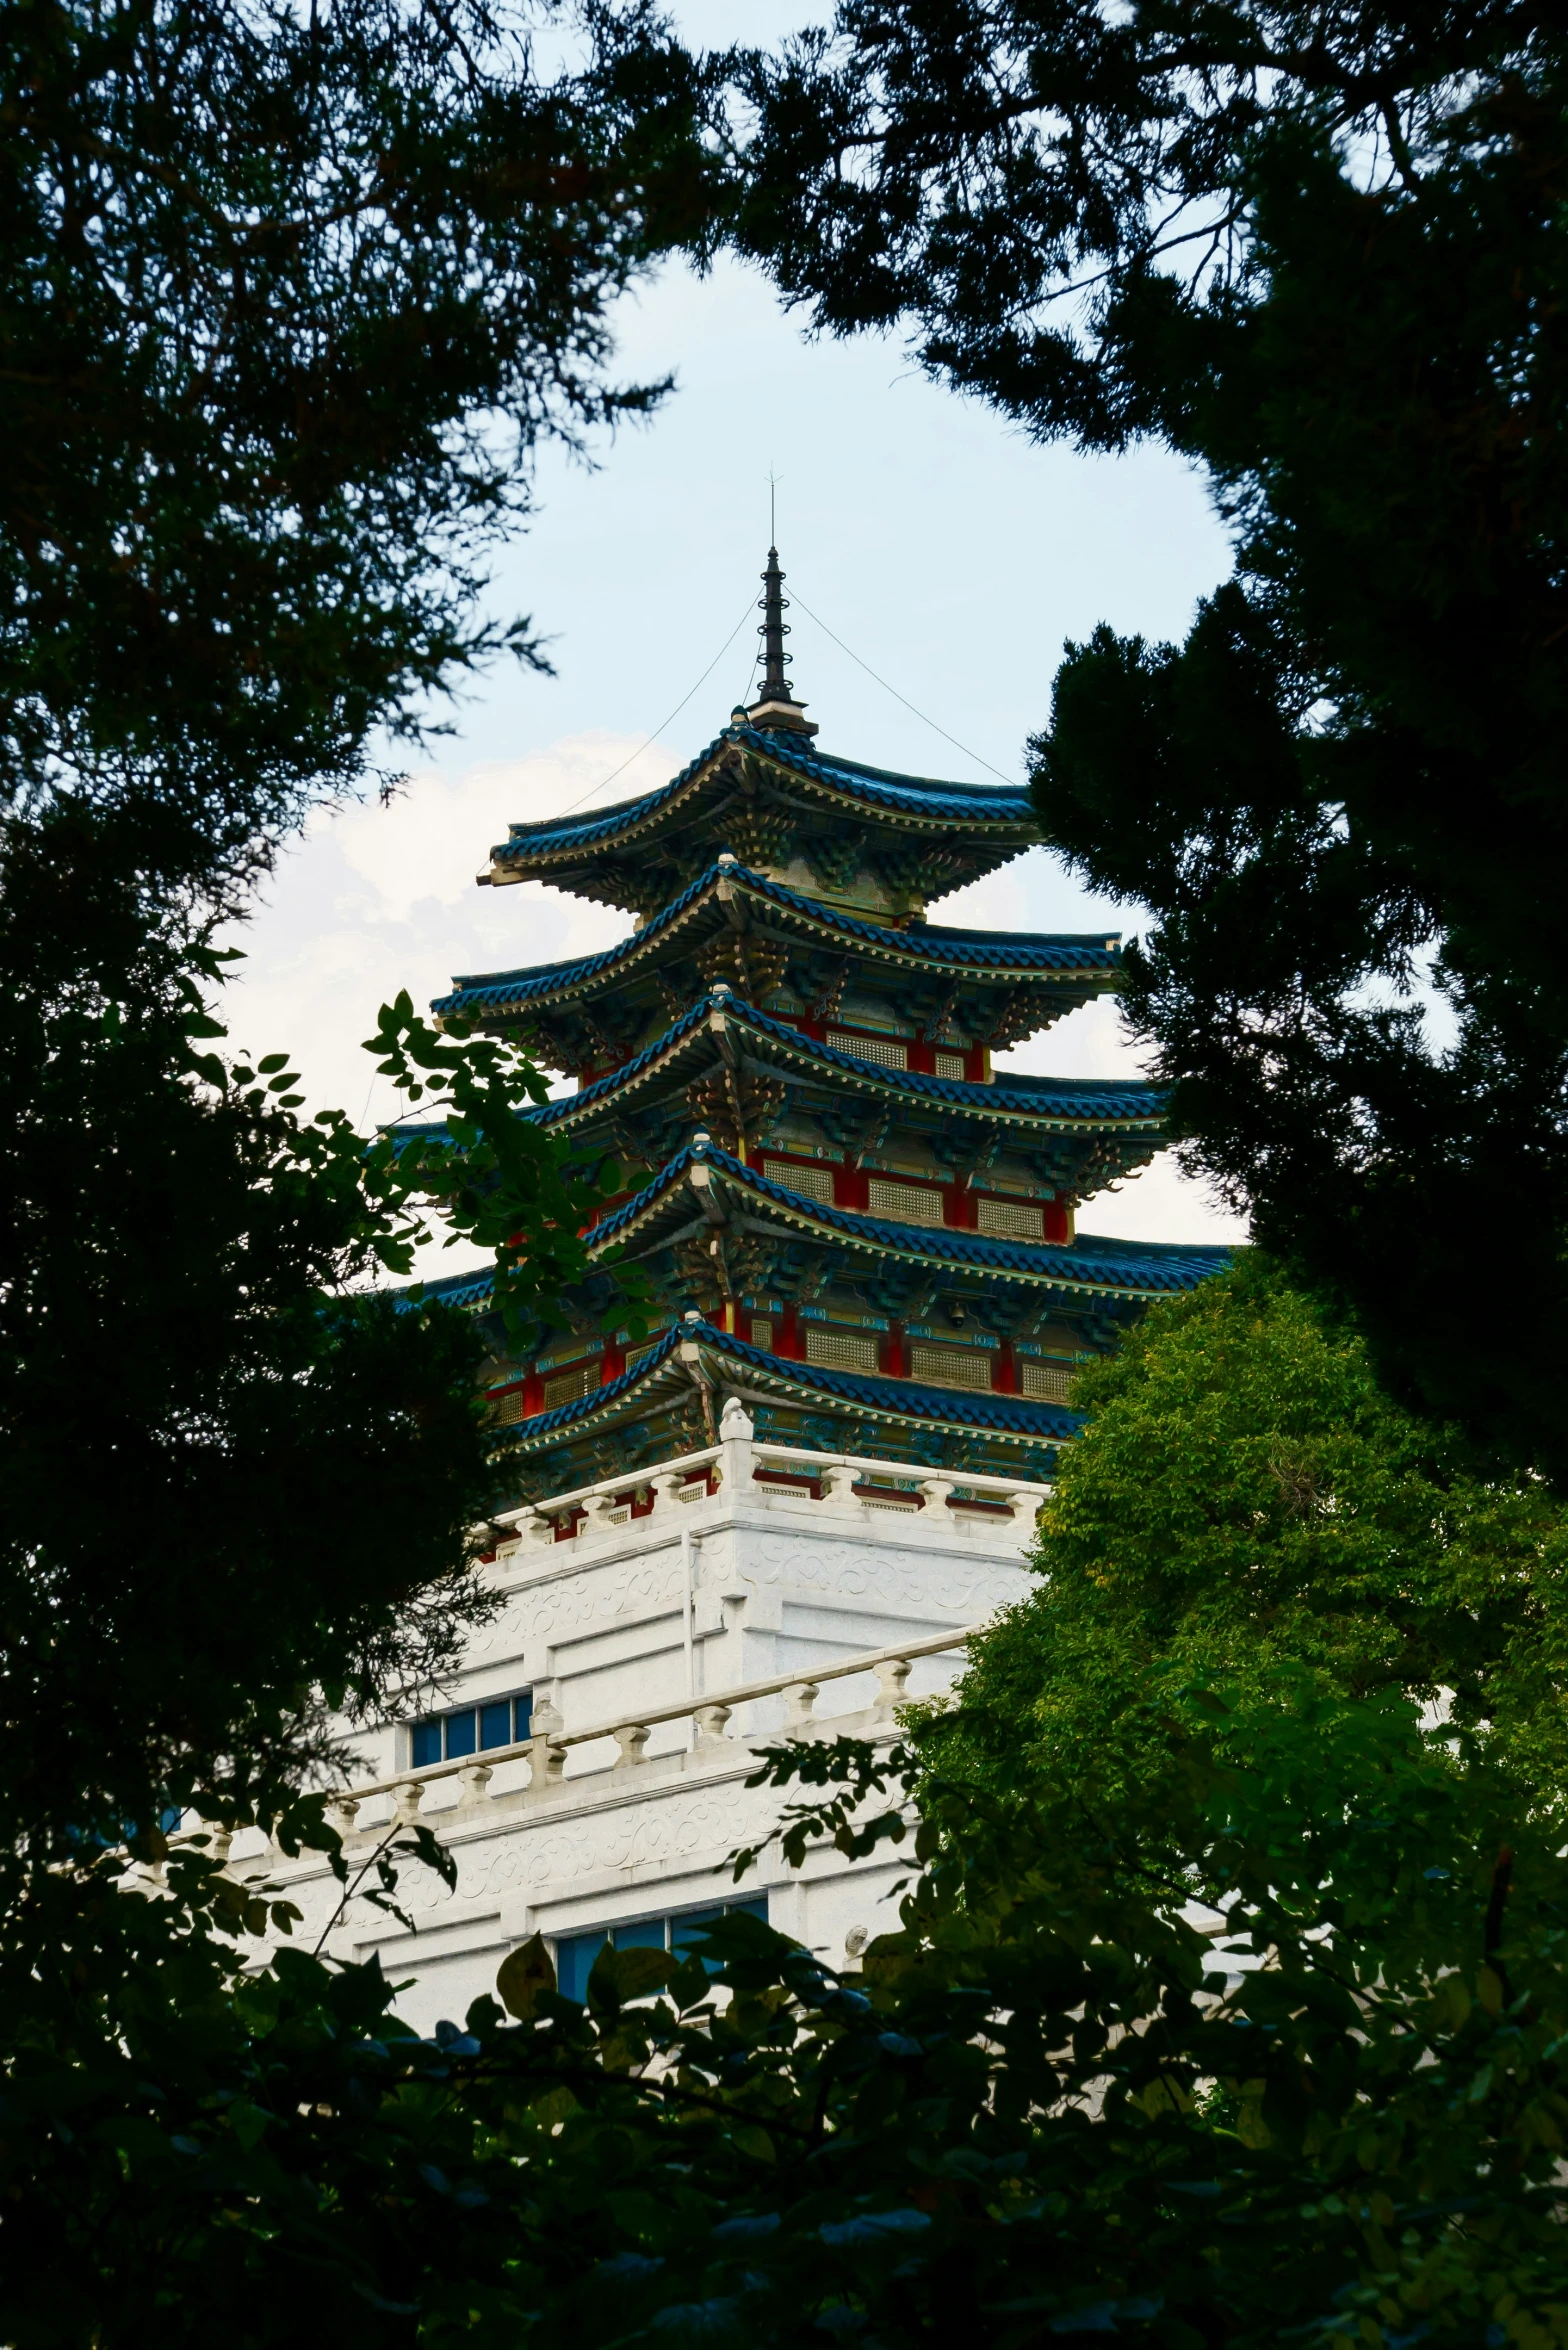 there is a tall pagoda seen through the trees